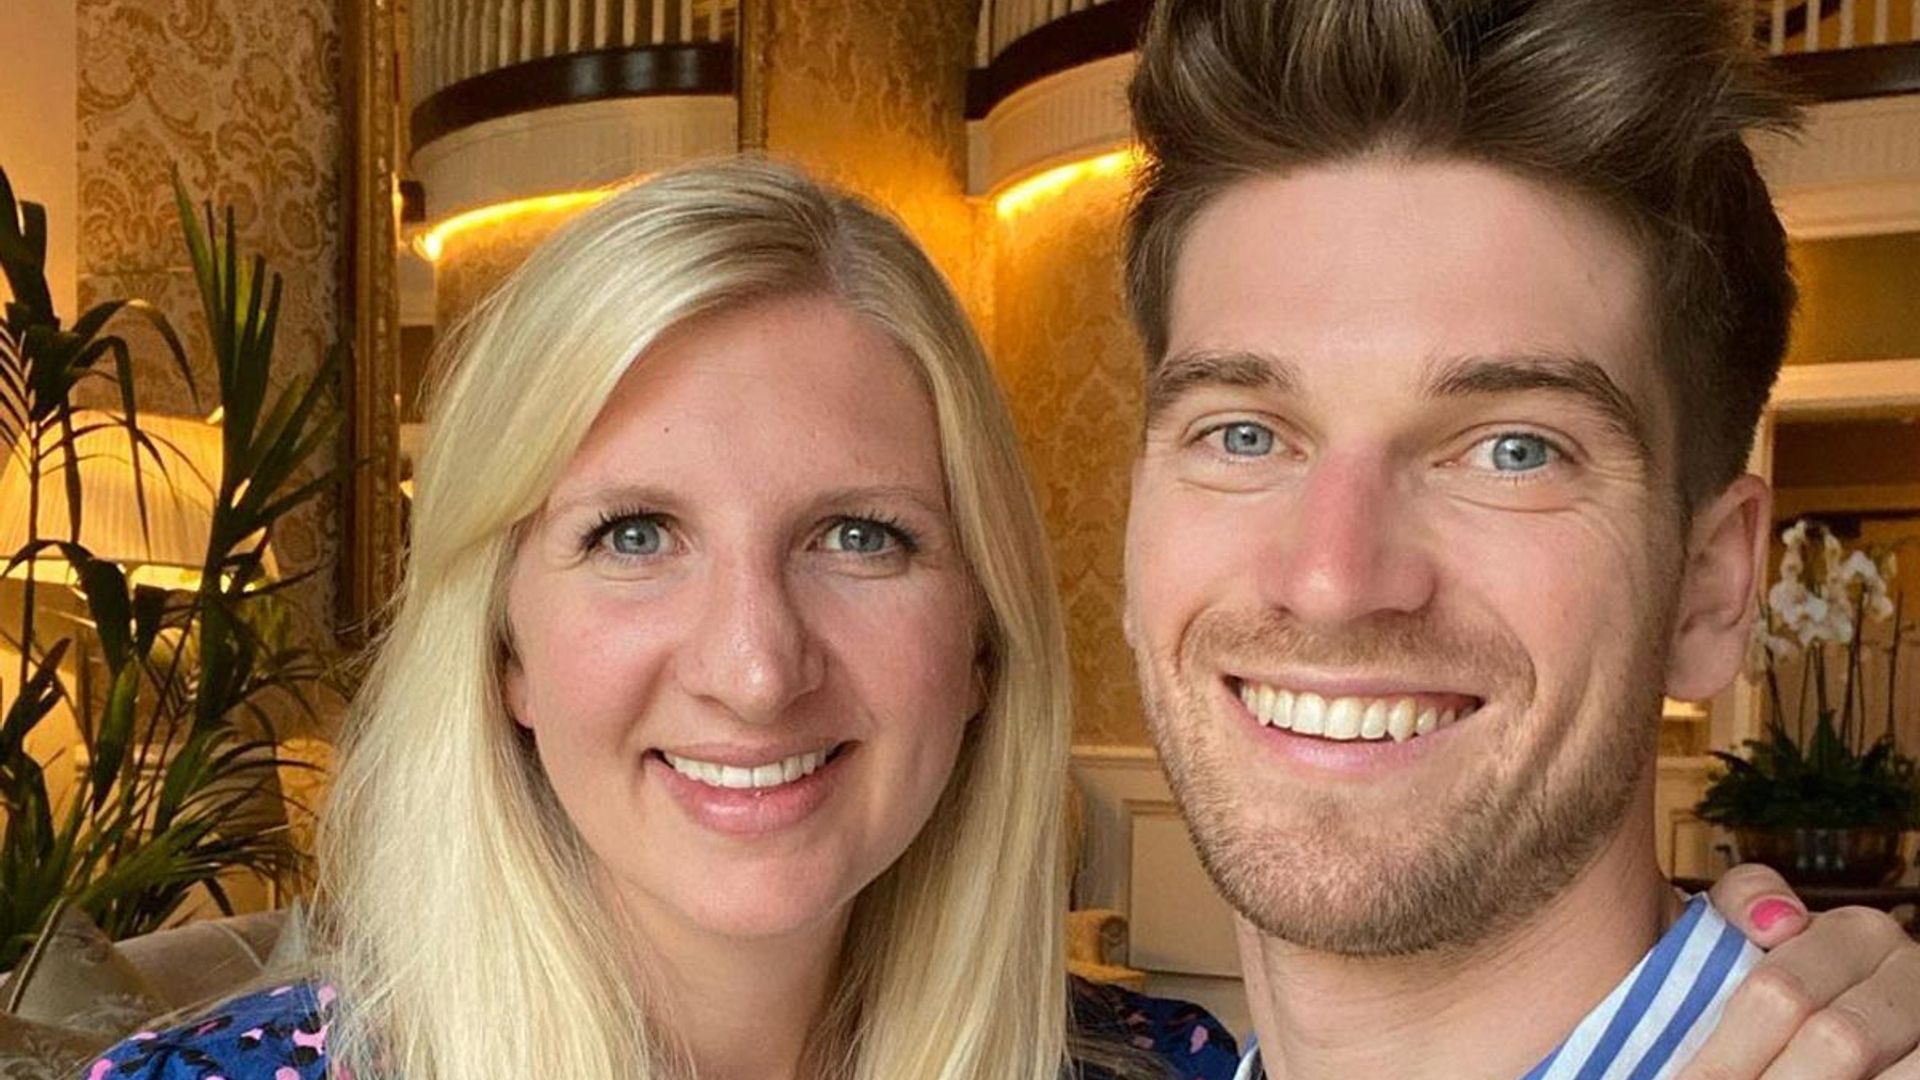 Why Rebecca Adlington and Andy Parsons' second honeymoon will be extra special